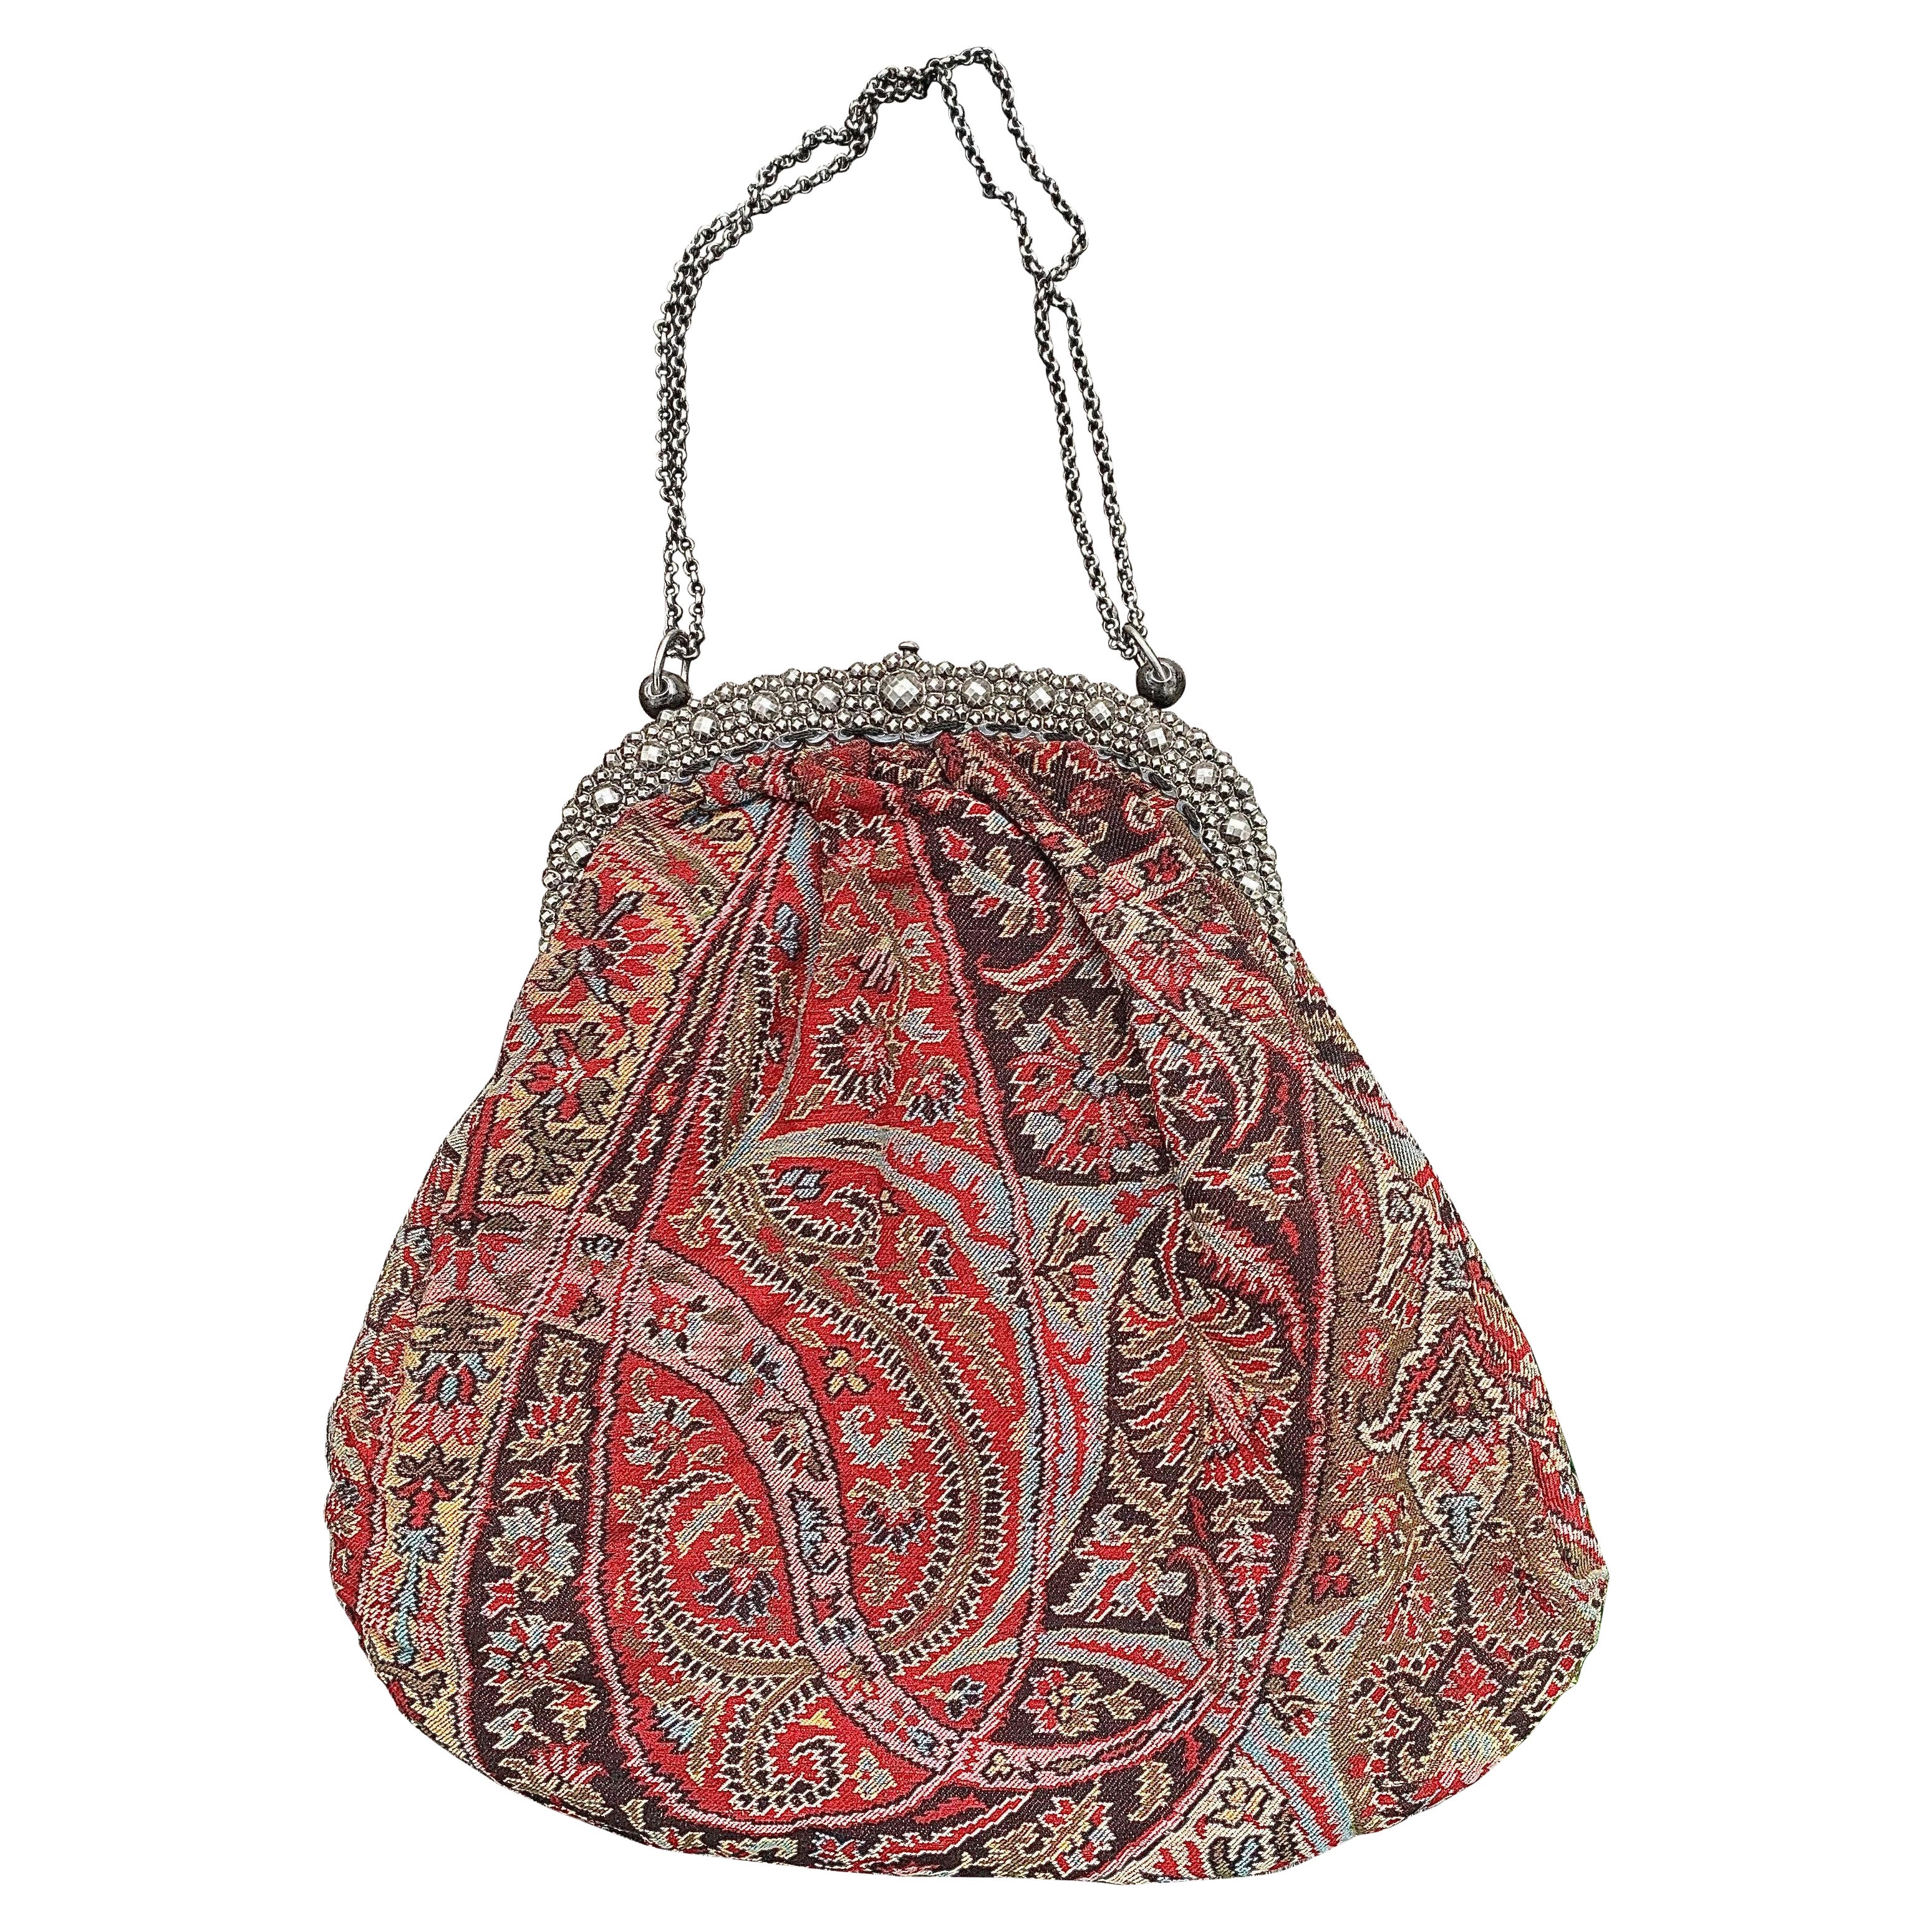 Antique French Silver Handbag Paisley fabric  For Sale